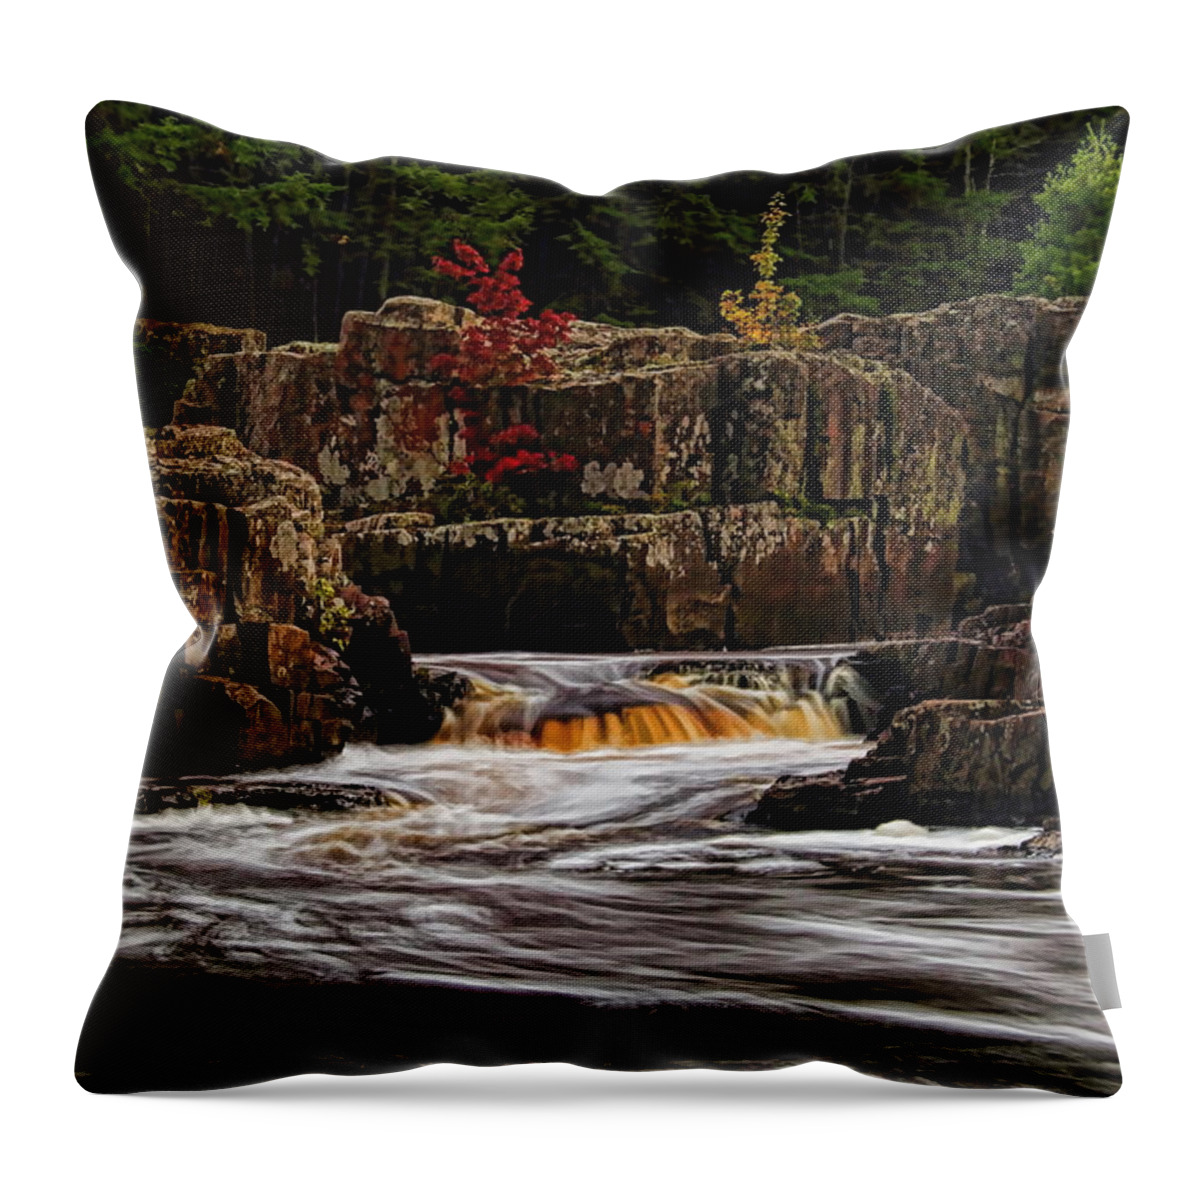 Autumn Throw Pillow featuring the photograph Waterfall Under Colored Leaves by Dale Kauzlaric